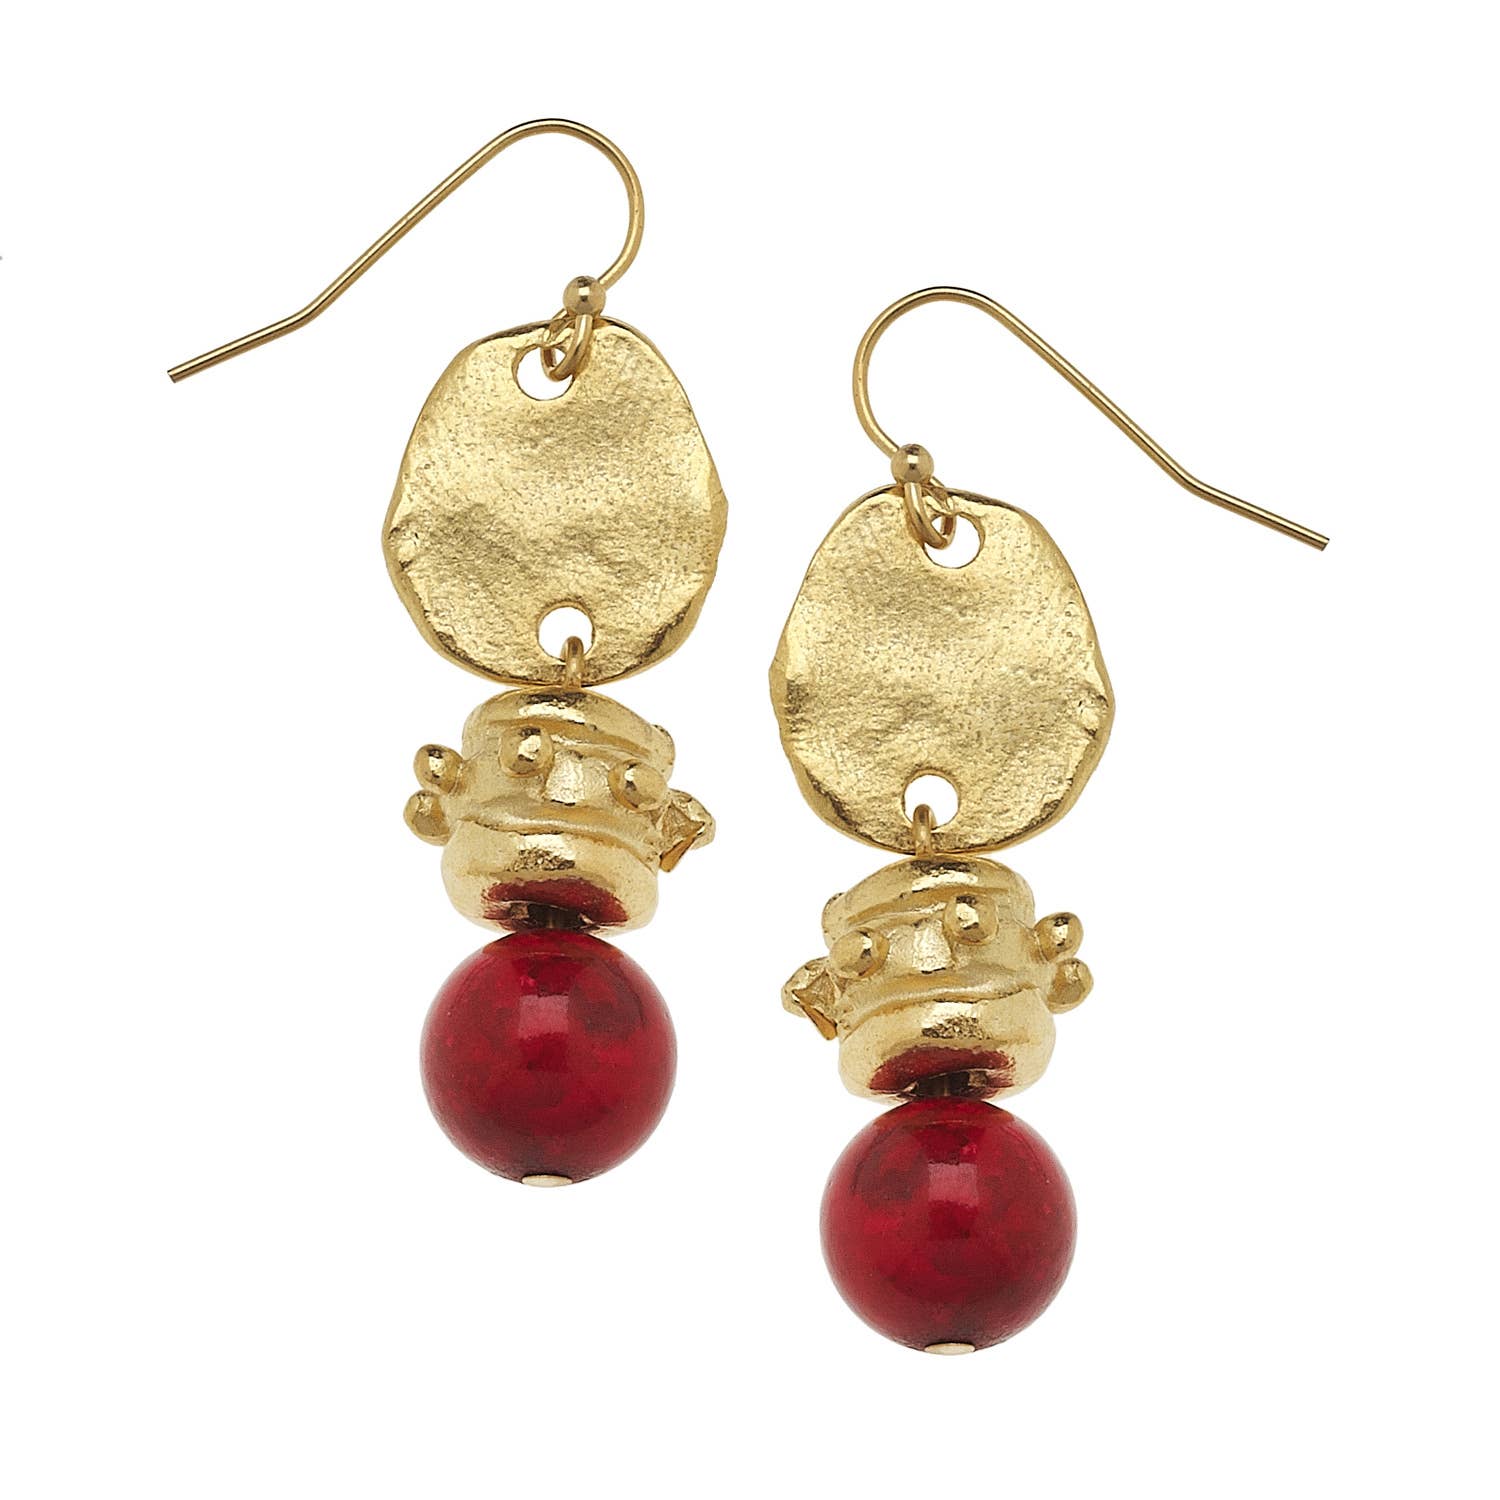 Susan Shaw - Gold Oval and Red Coral Earrings